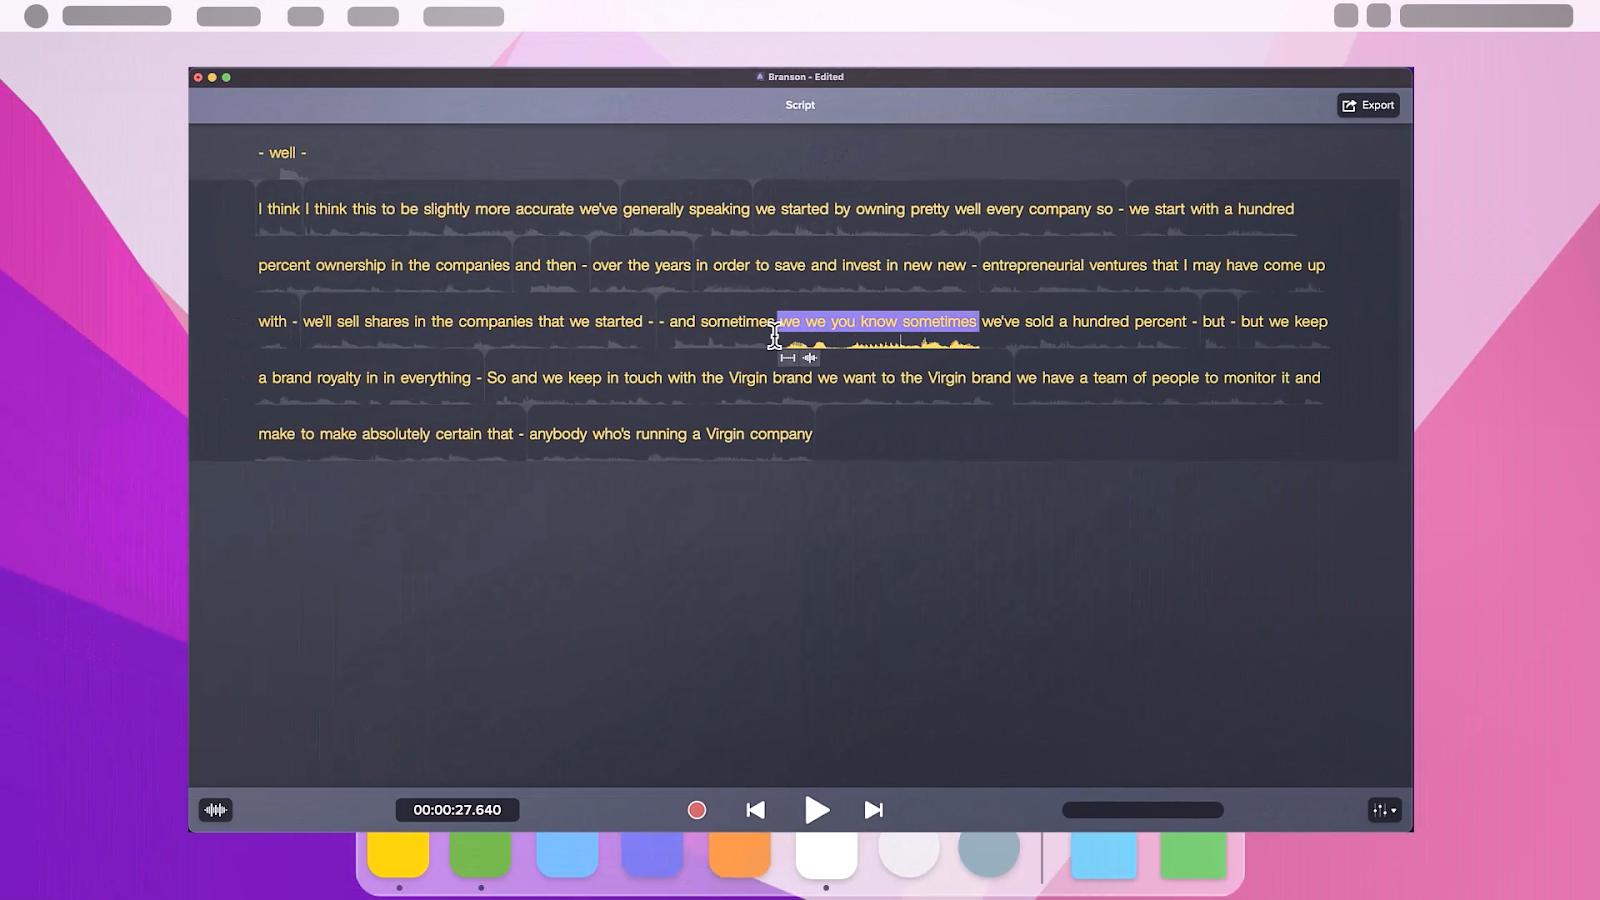 Image of the transcript being edited in Audiate.